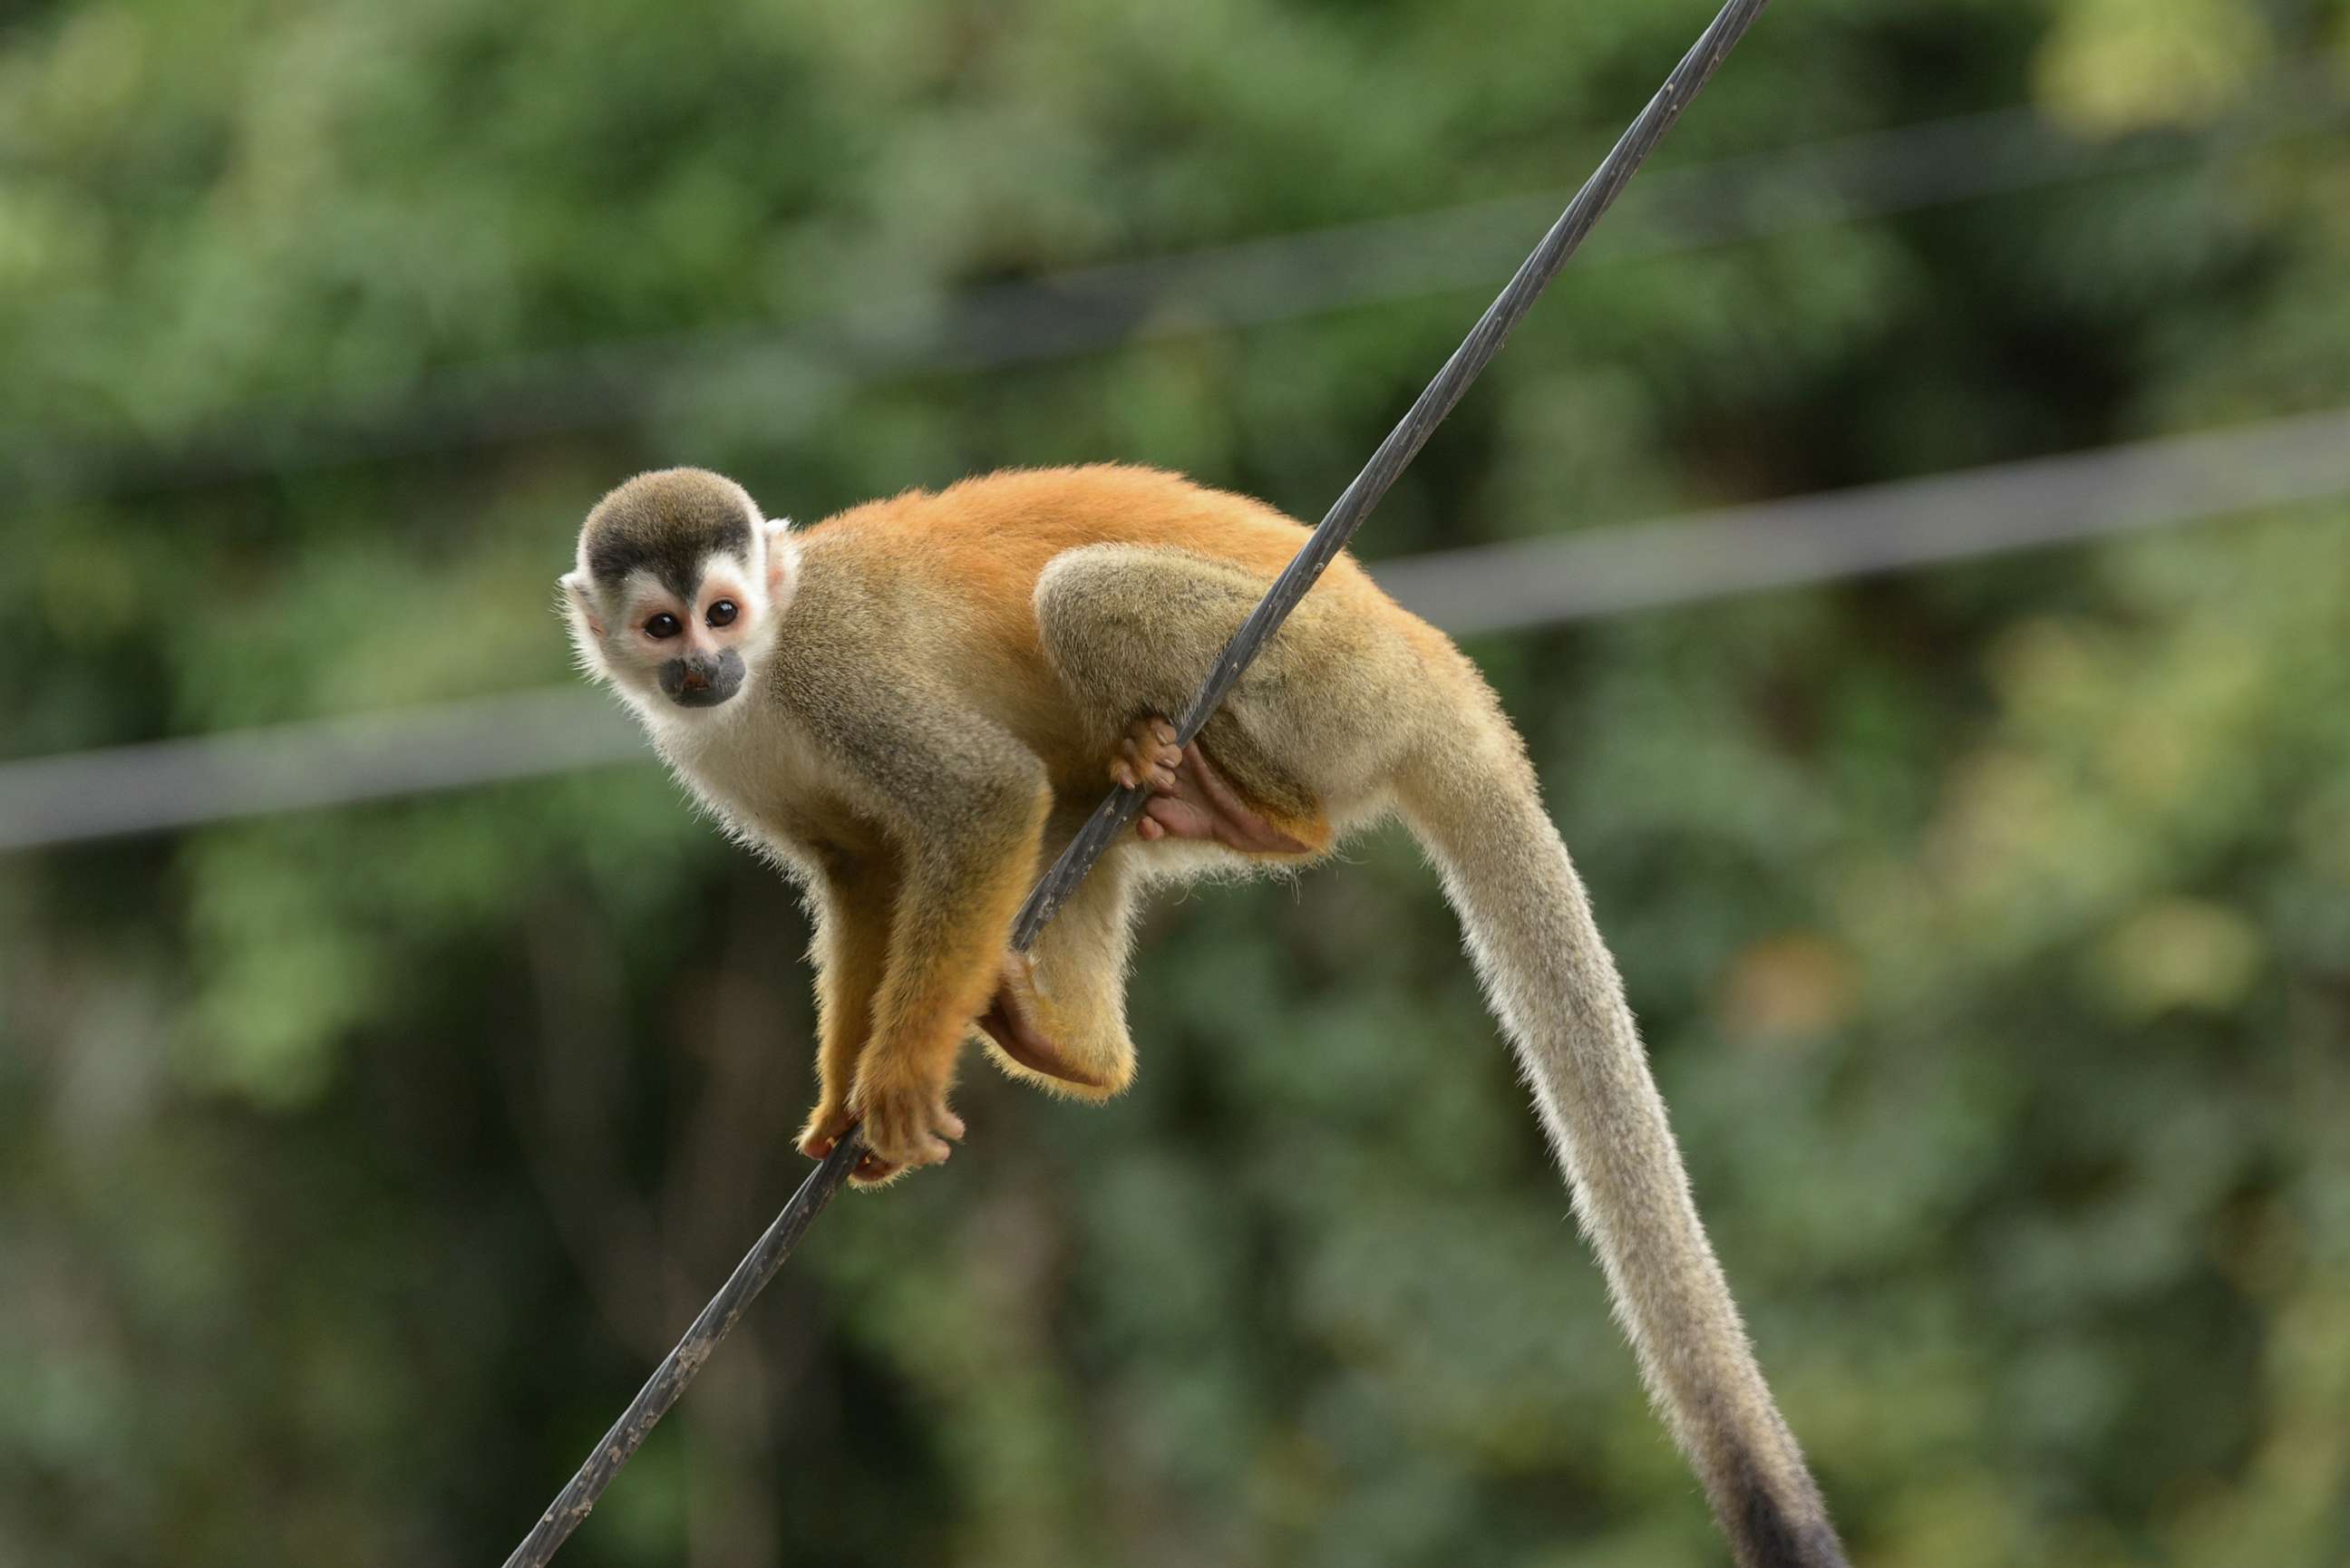 PHOTO: A stock photo of a squirrel monkey.